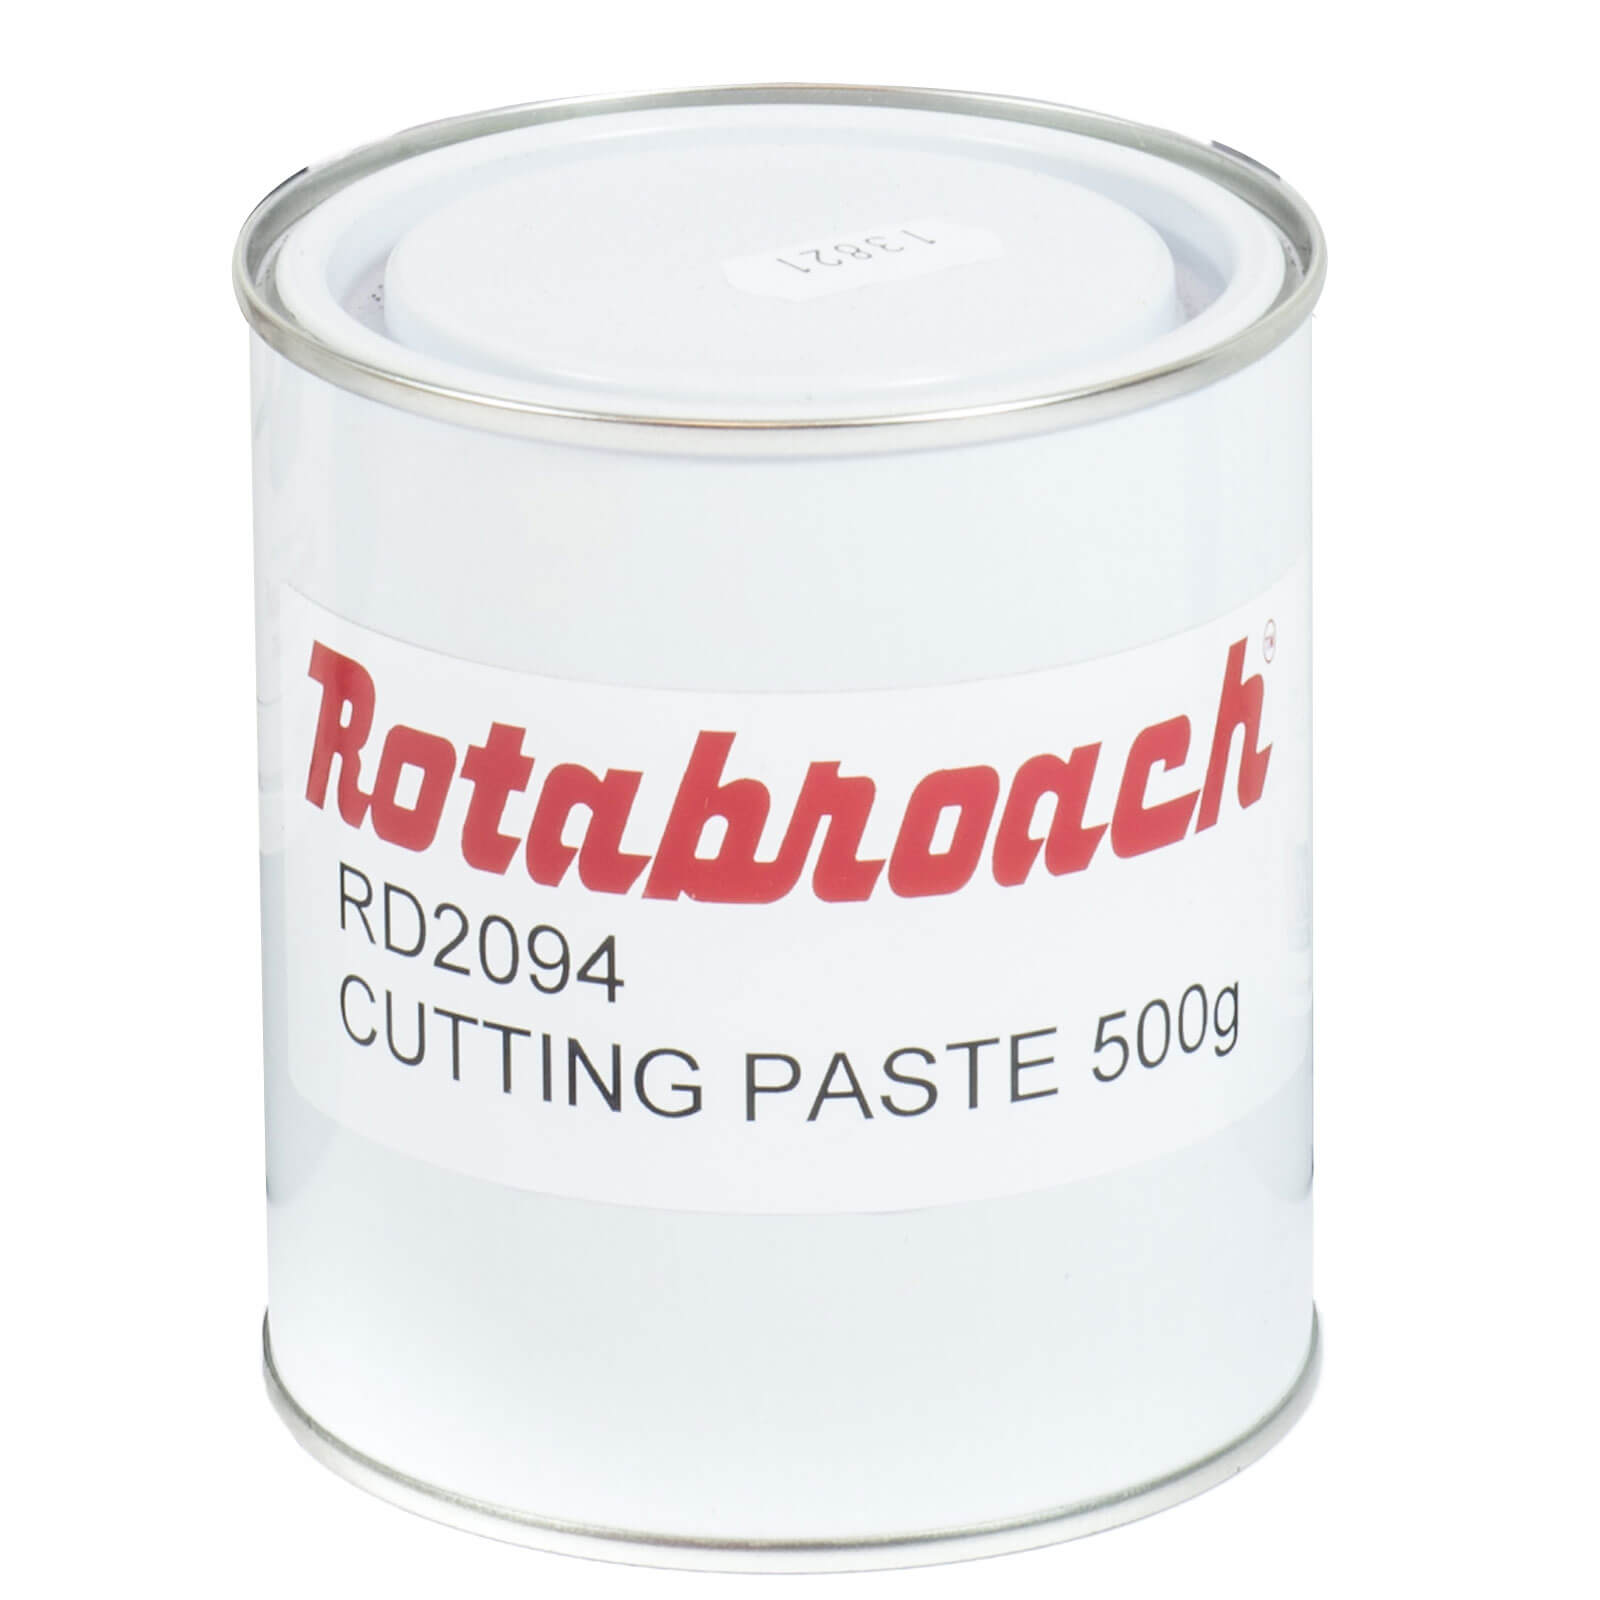 Image of Rotabroach Mag Drill Cutting Paste 500g